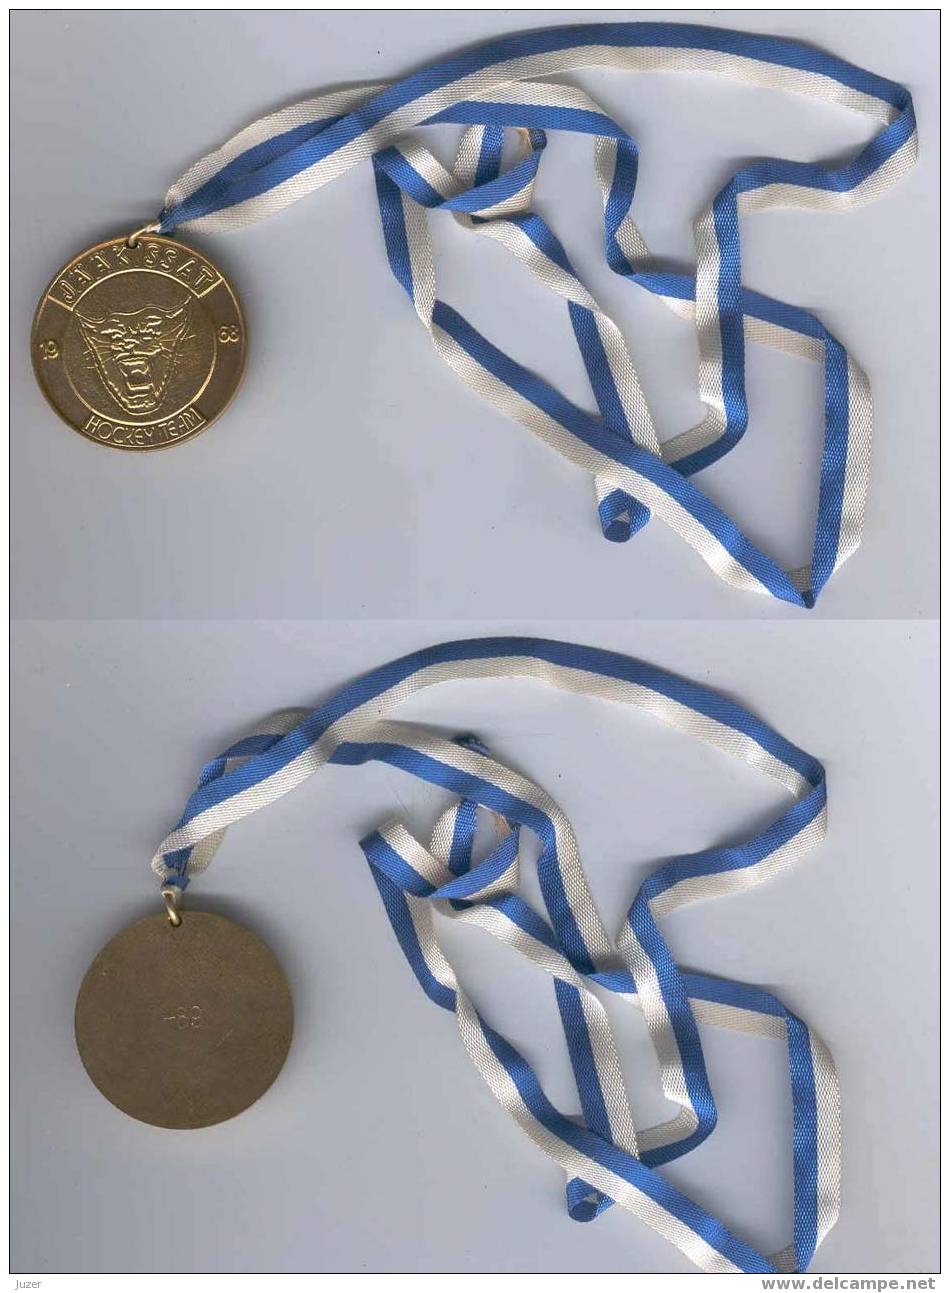 Finland: ICE CATS Hockey Team Medal (1989) - Kleding, Souvenirs & Andere